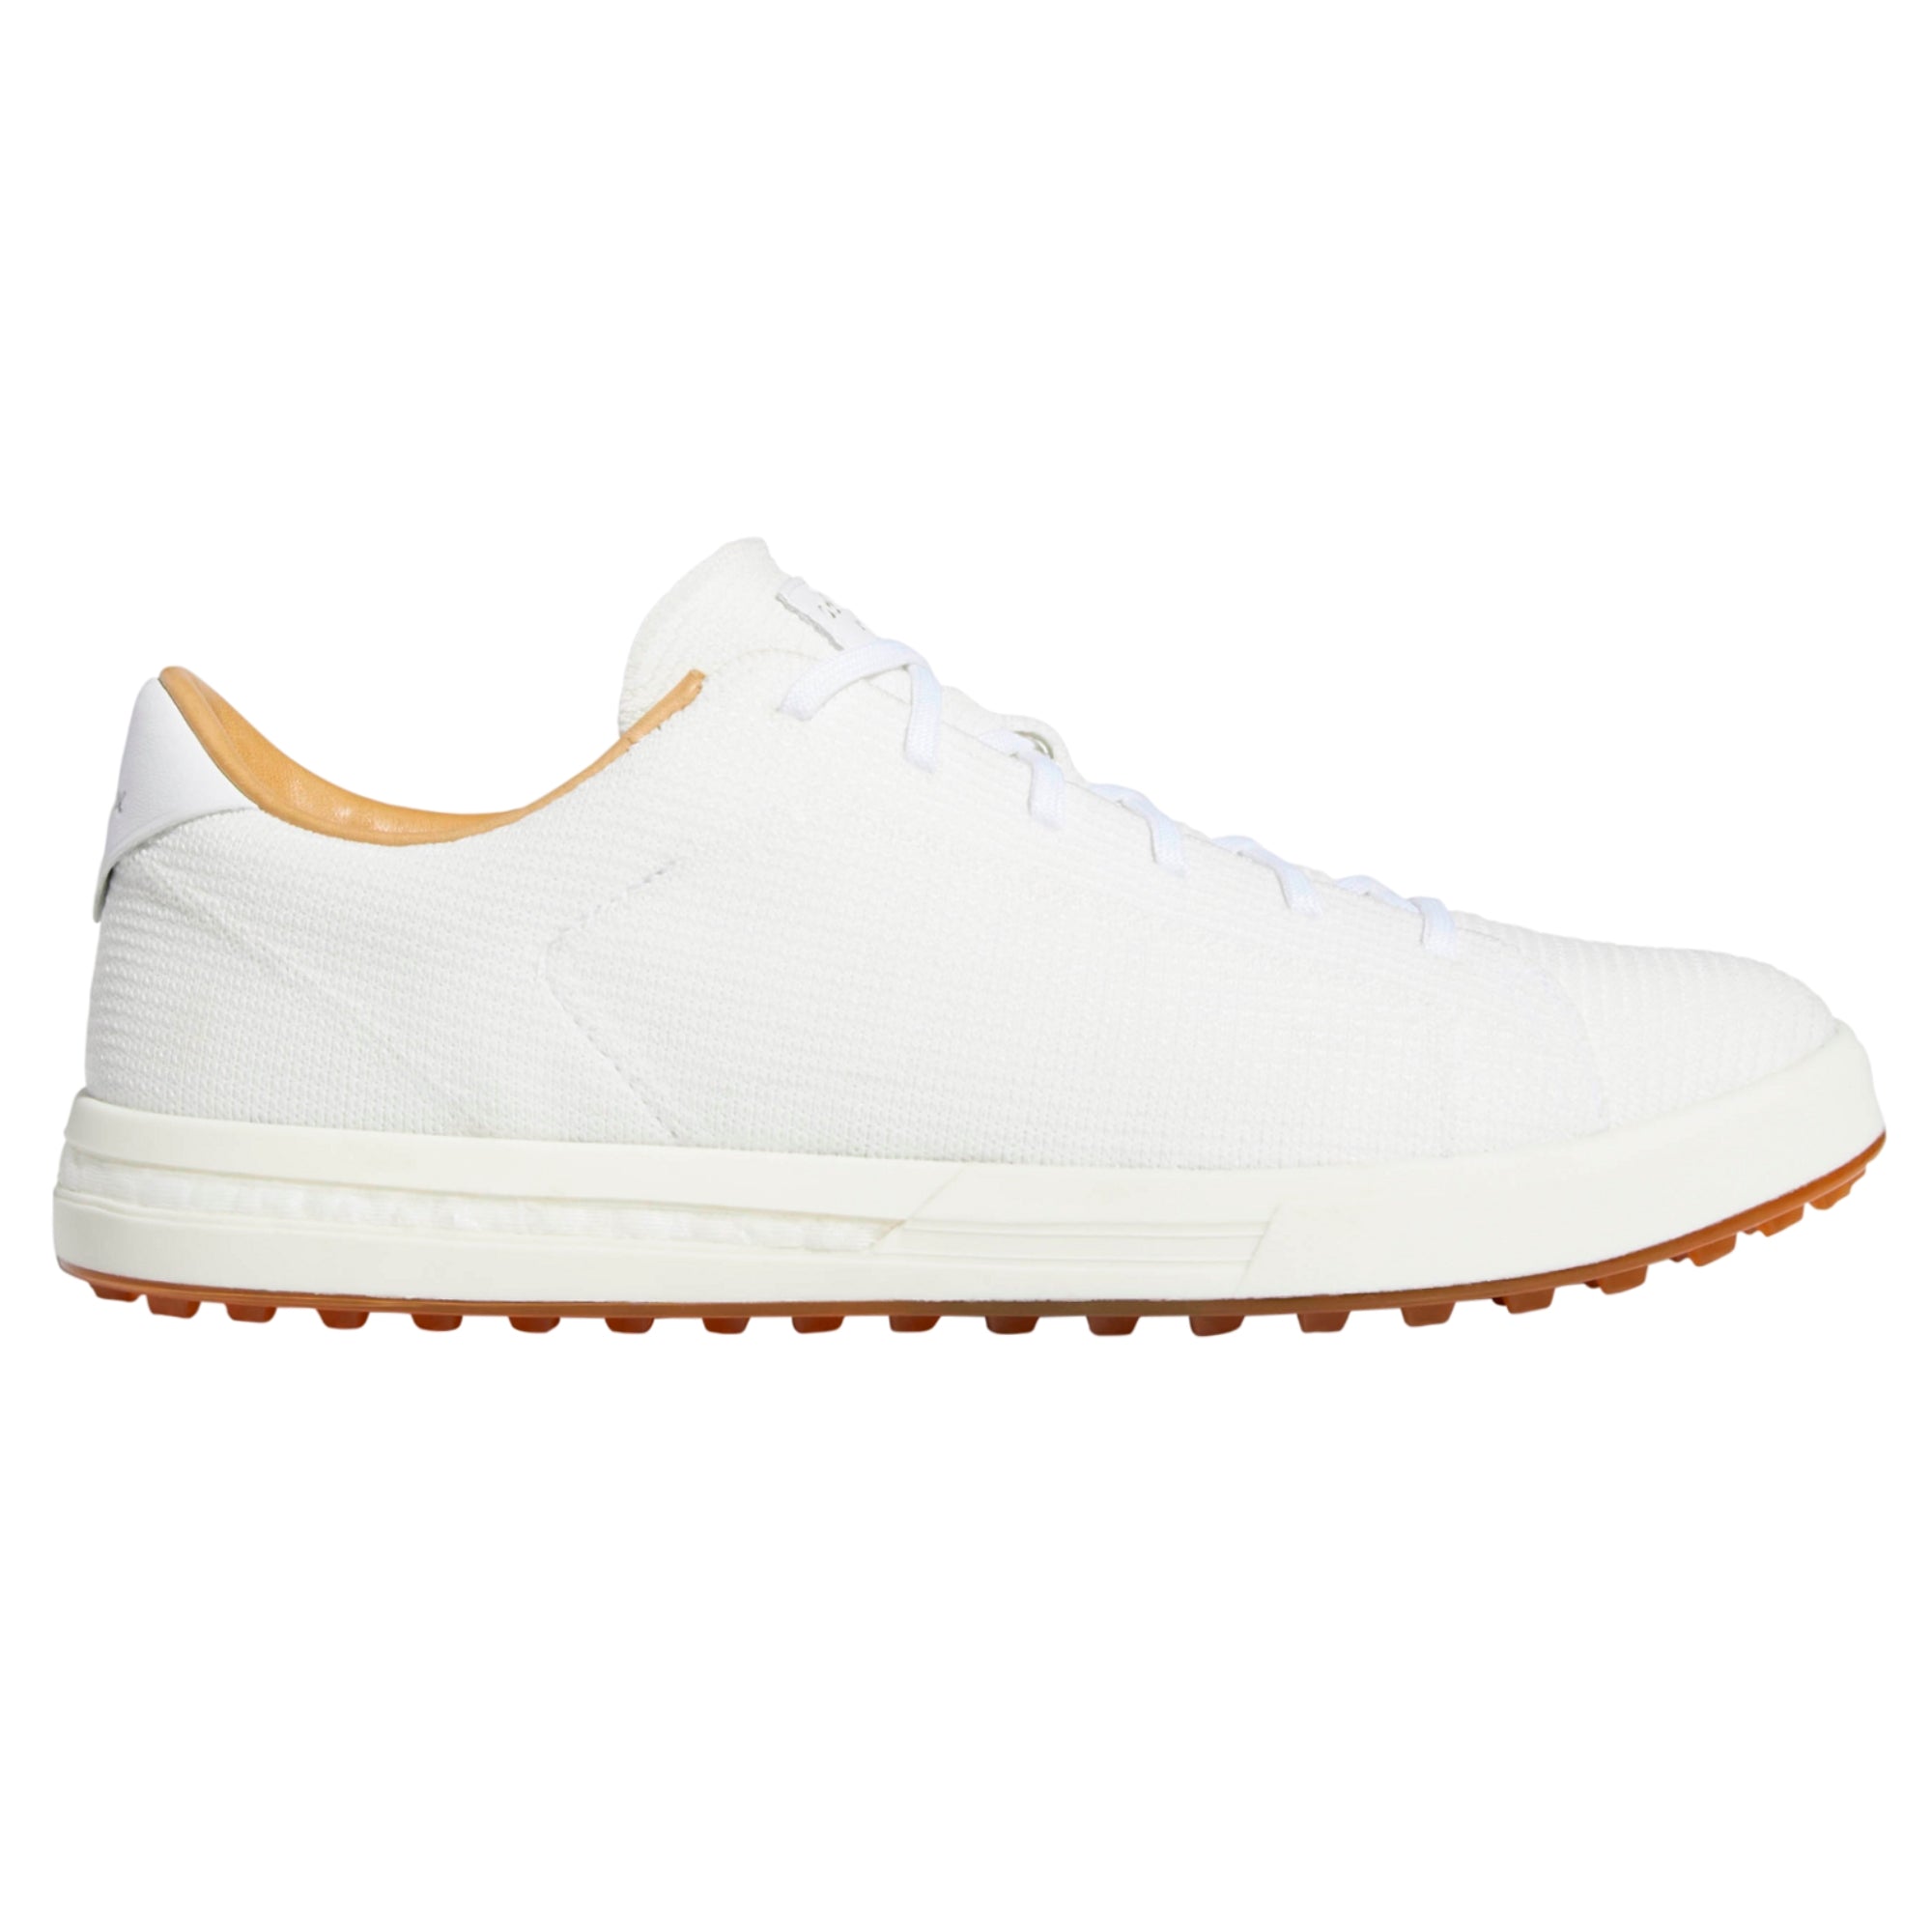 adipure sp knit golf shoes